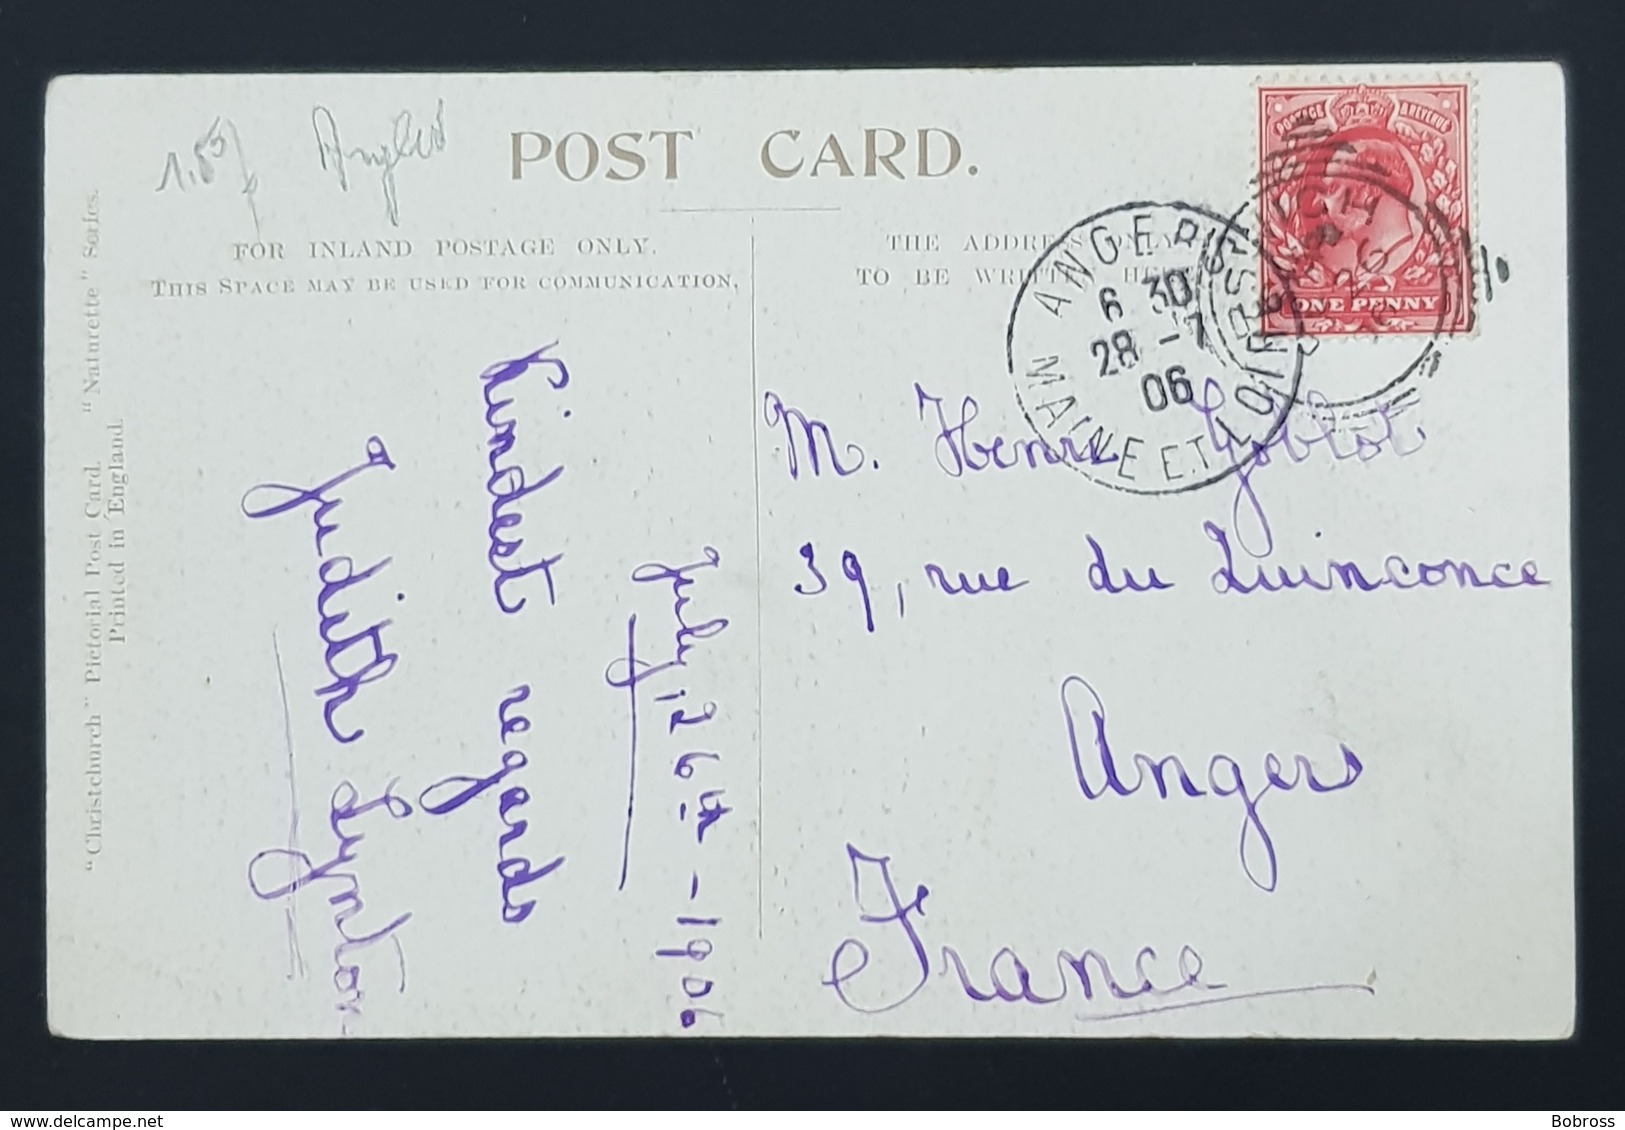 1906 PC, St.Helen's, Ipswich To Angers France, United Kingdom, England, Great Britain - Ipswich